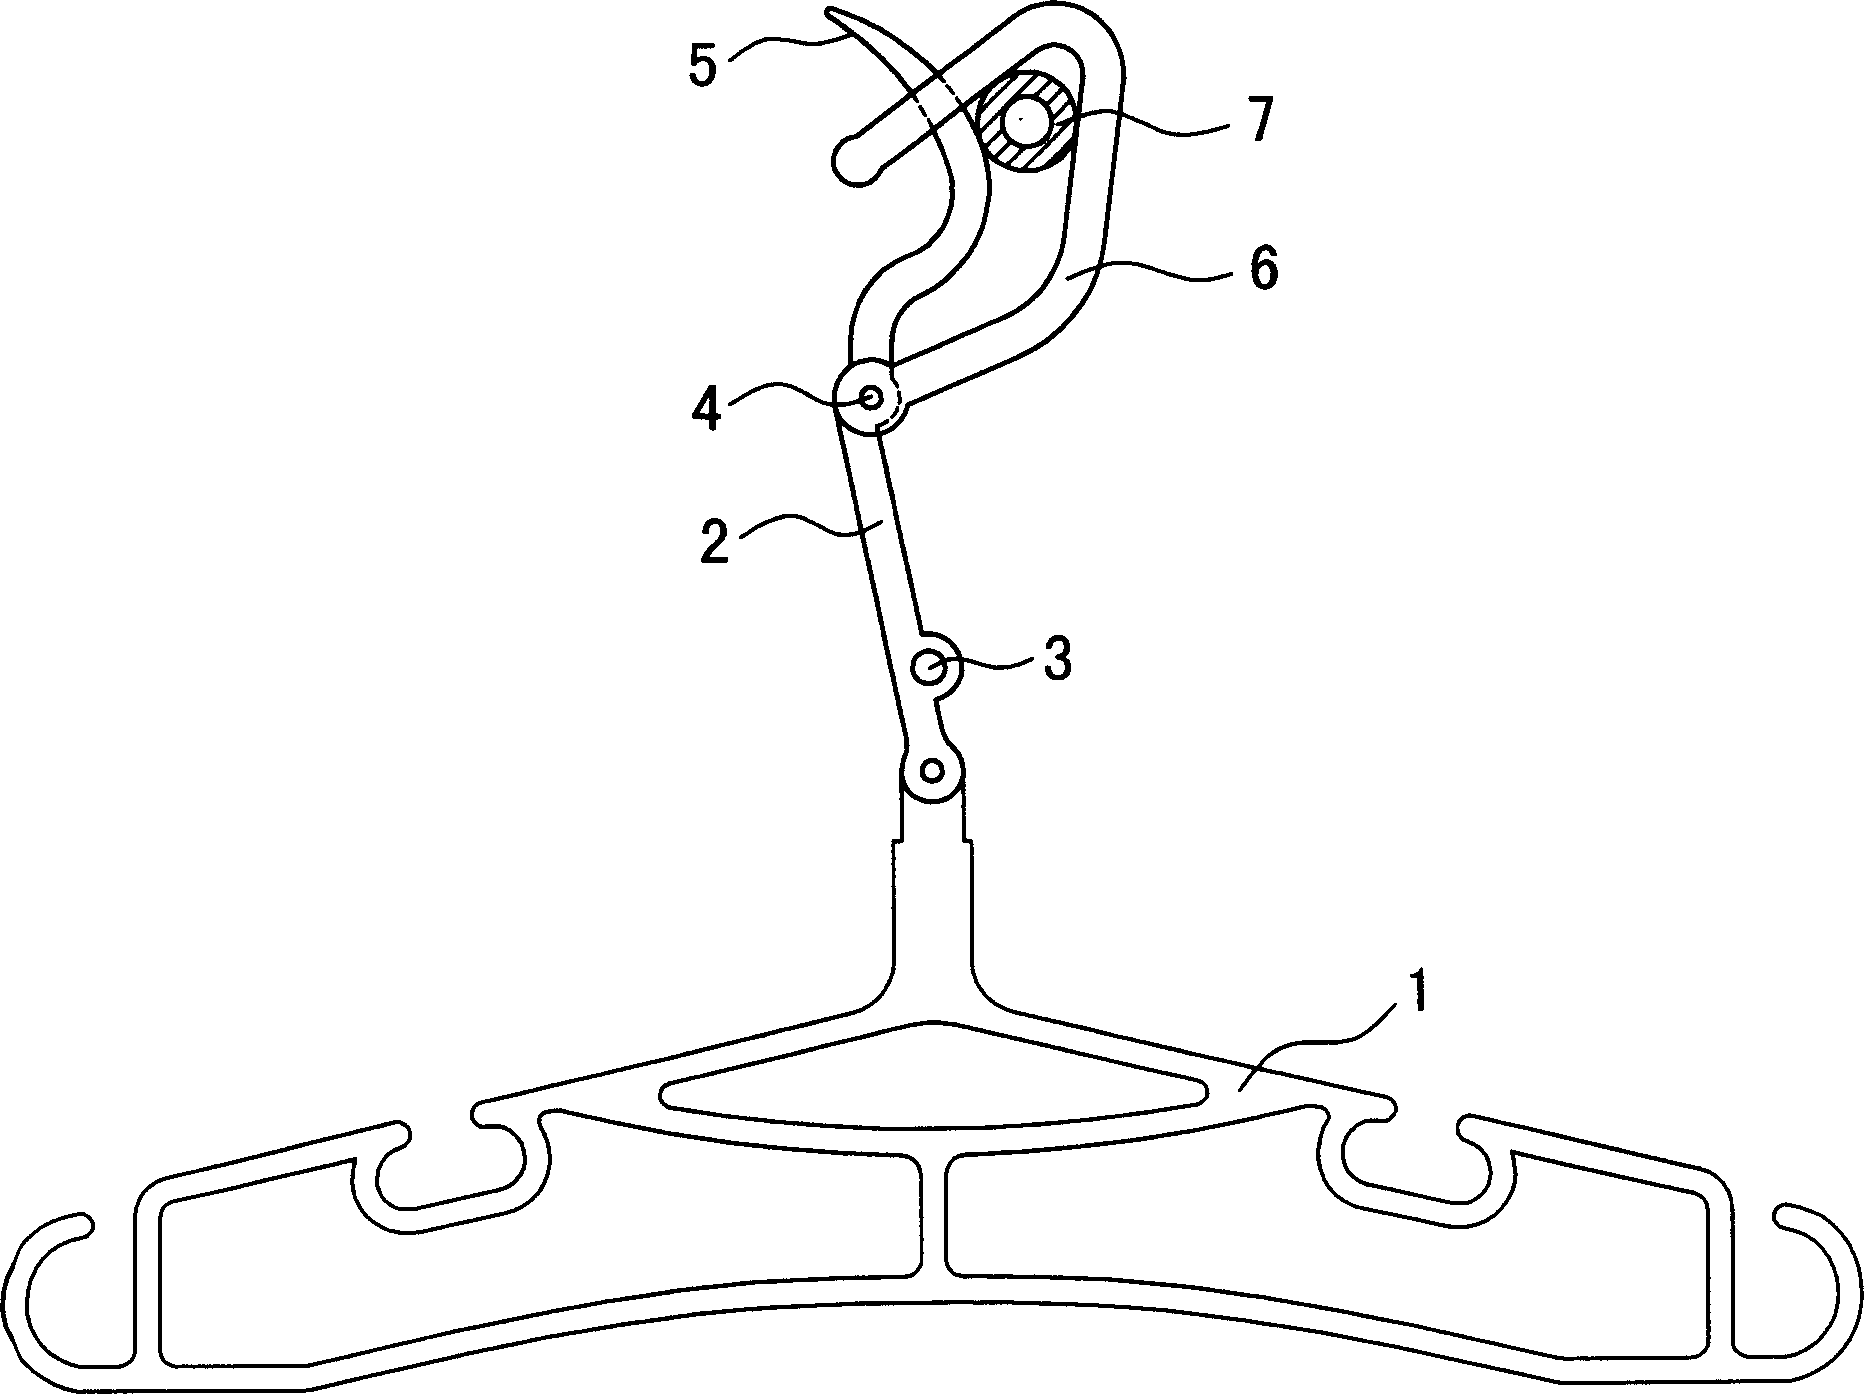 Automatic clamping wind-proof coat hanger